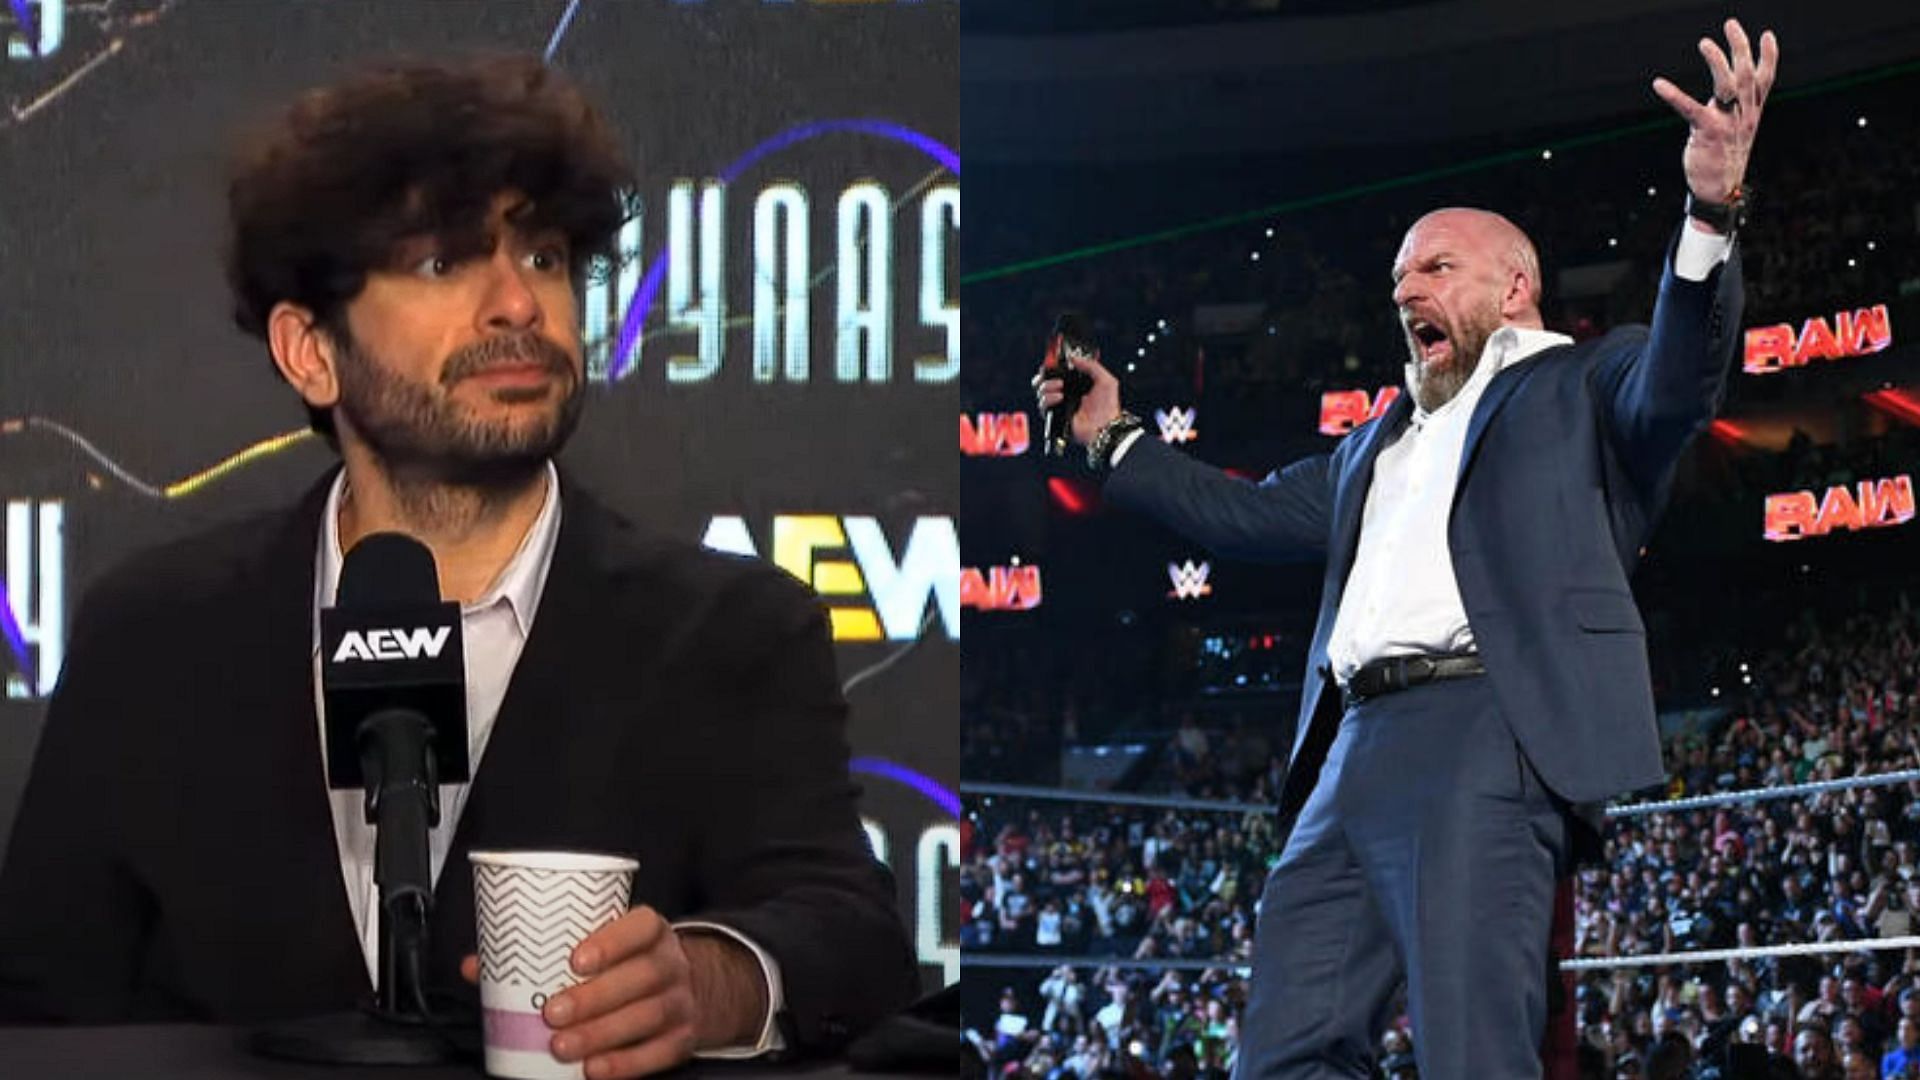 Tony Khan and Triple H are both top players in the wrestling industry [photo courtesy of AEW